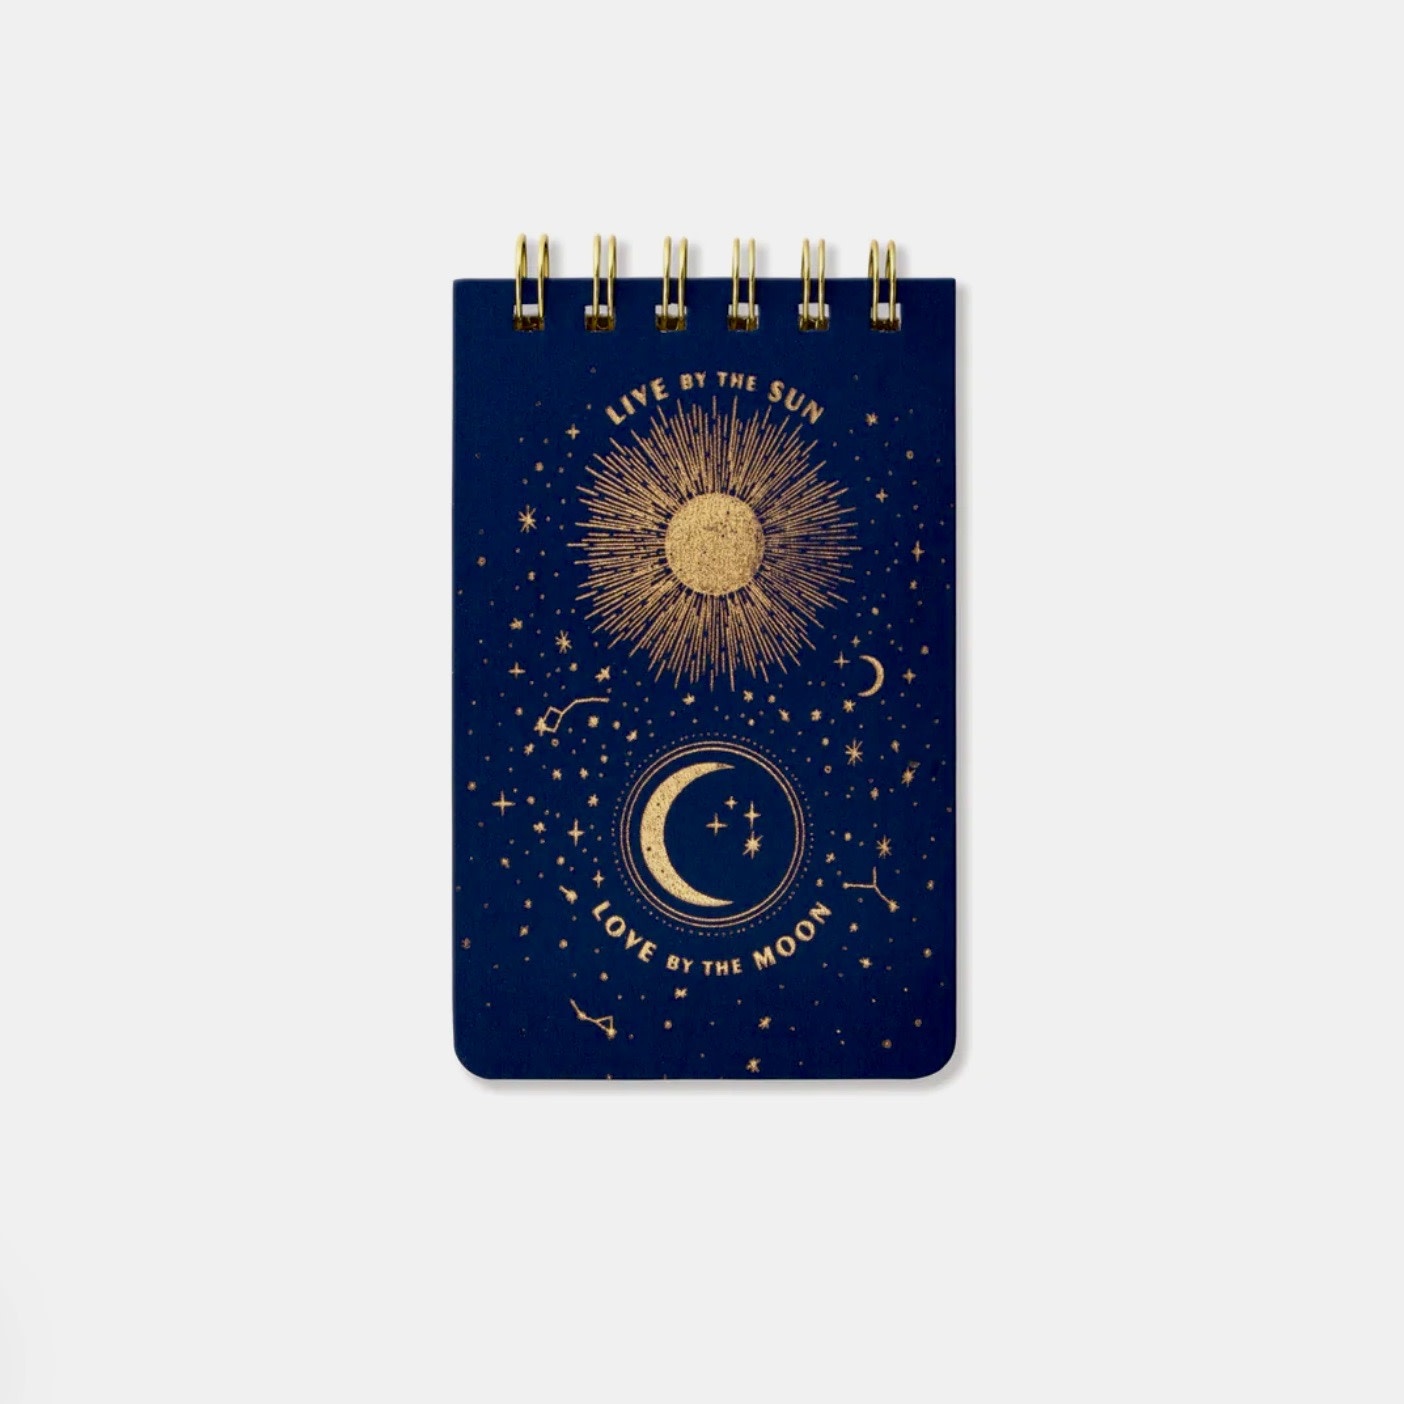 Designworks Live By The Sun Blue Notepad